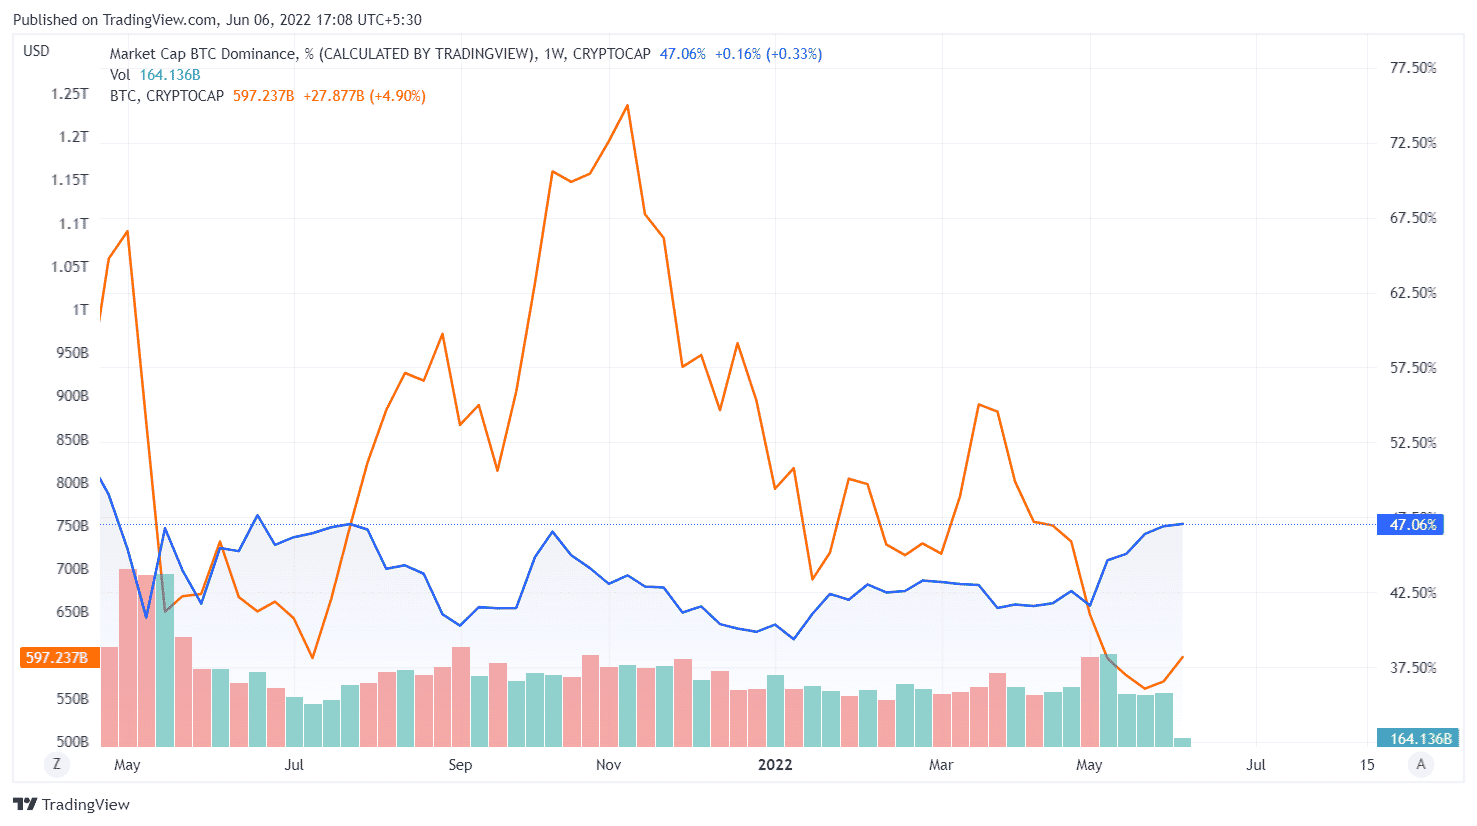 BTC dominance at levels last seen in July